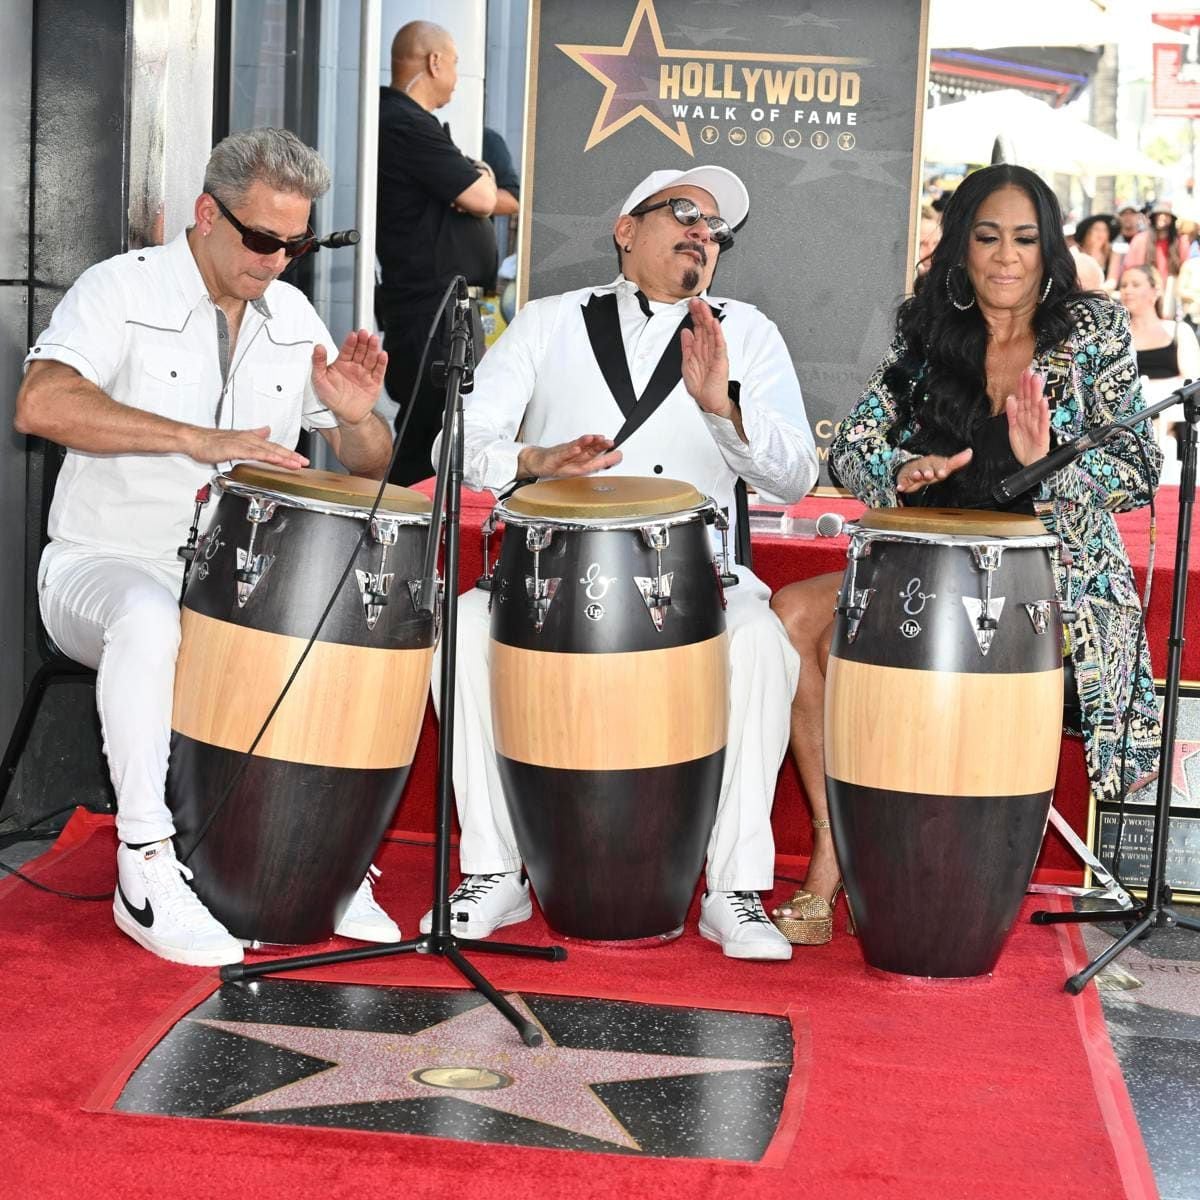 Sheila E. Honored with Star on The Hollywood Walk of Fame